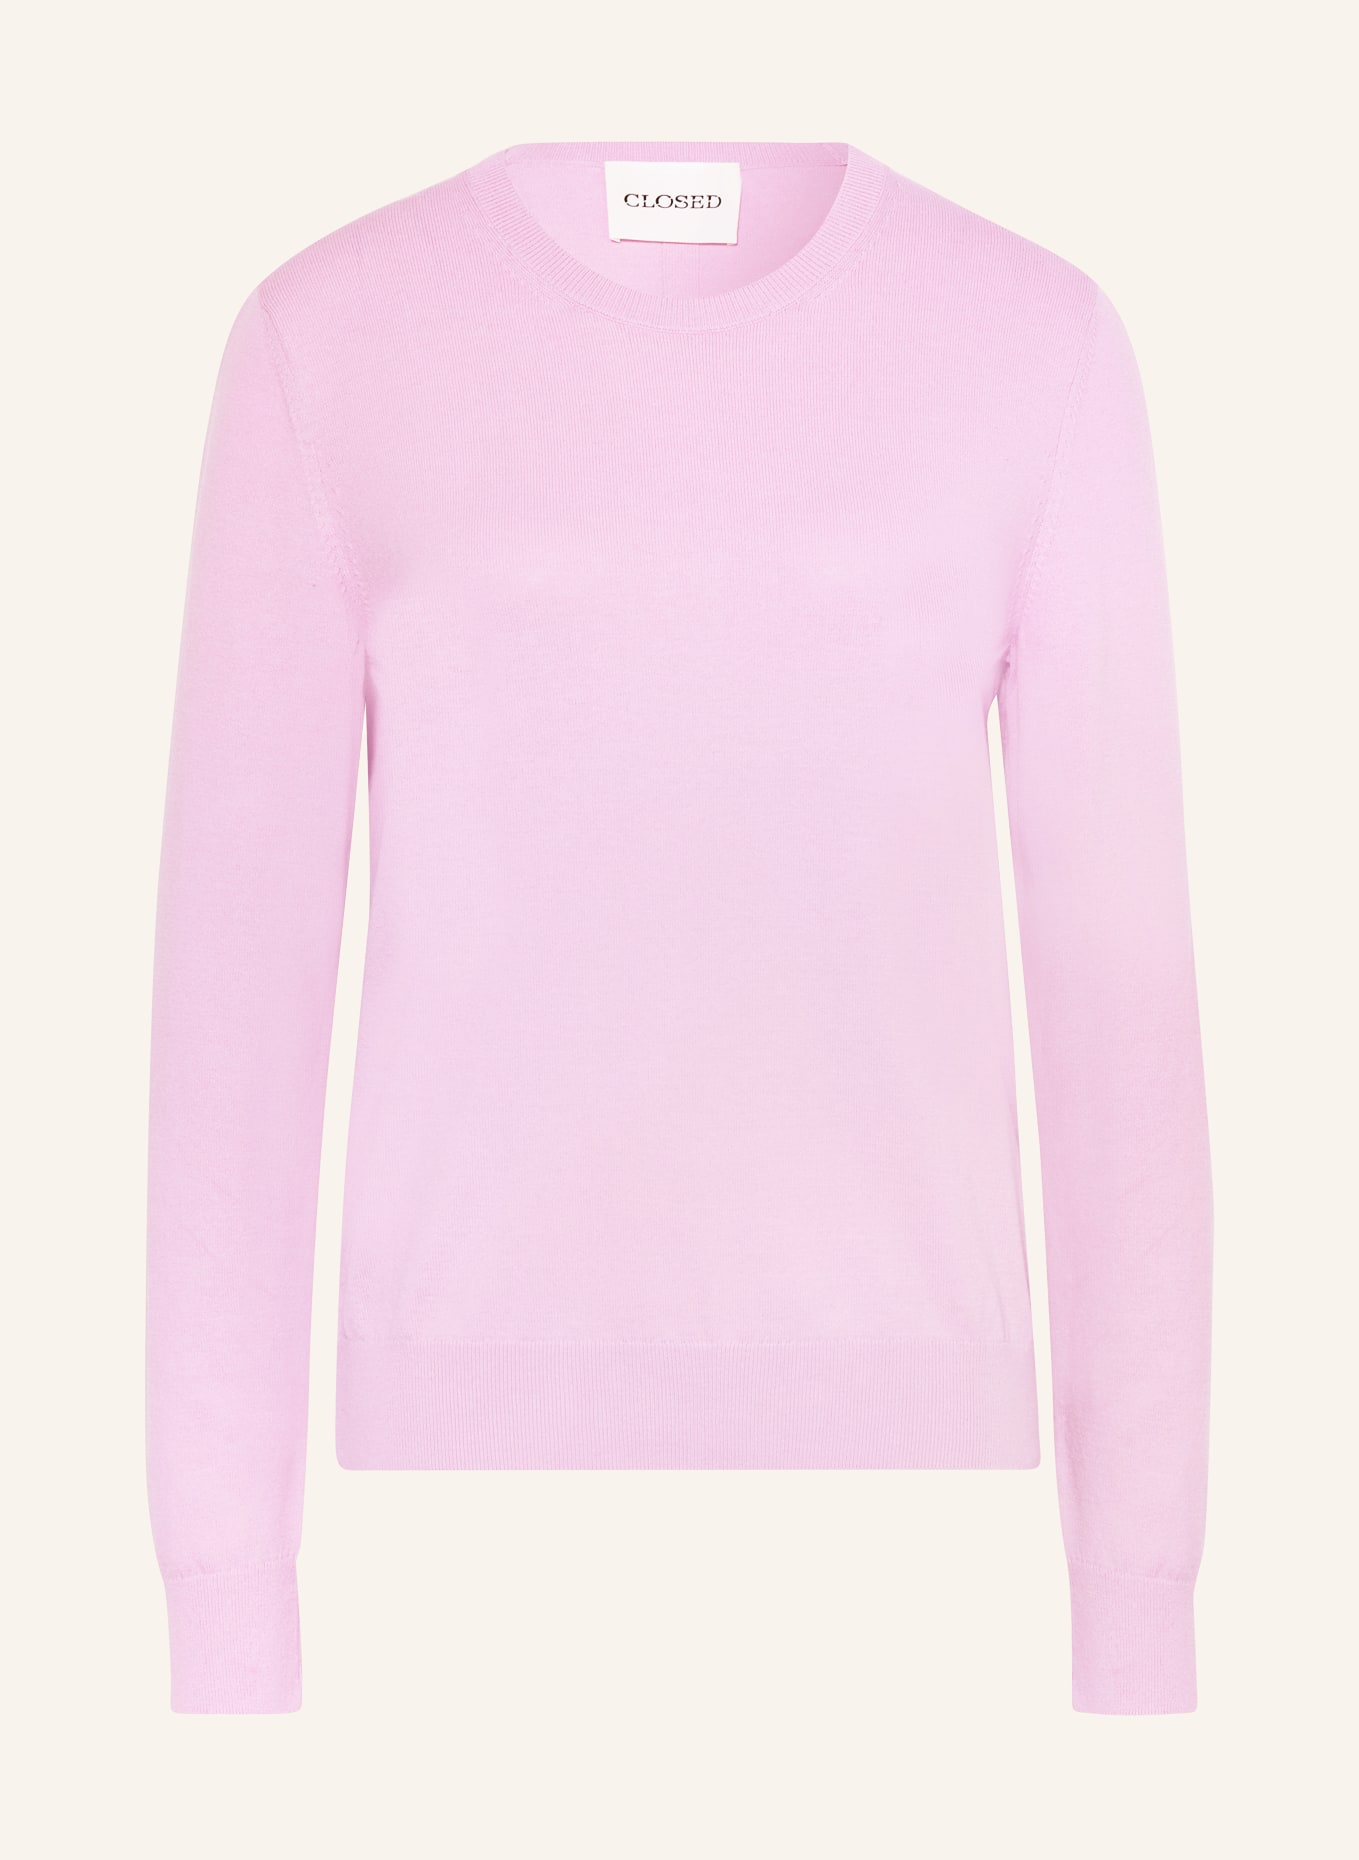 CLOSED Long sleeve shirt, Color: PINK (Image 1)